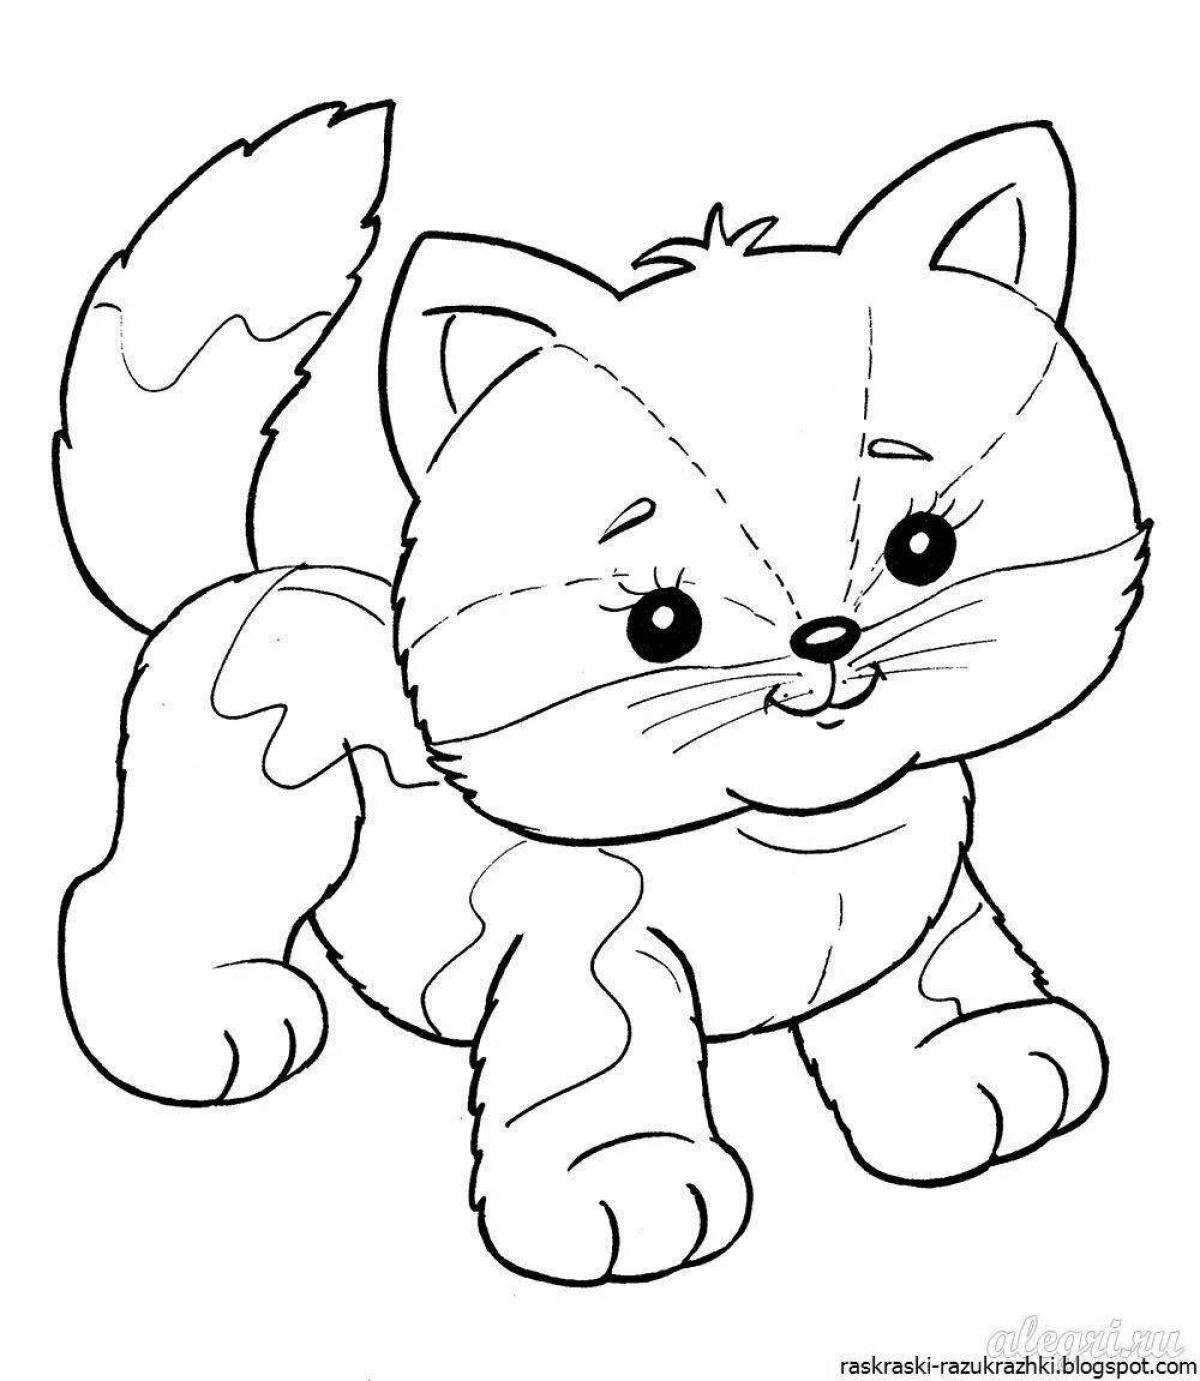 Glitter coloring book for children 5-6 years old cats